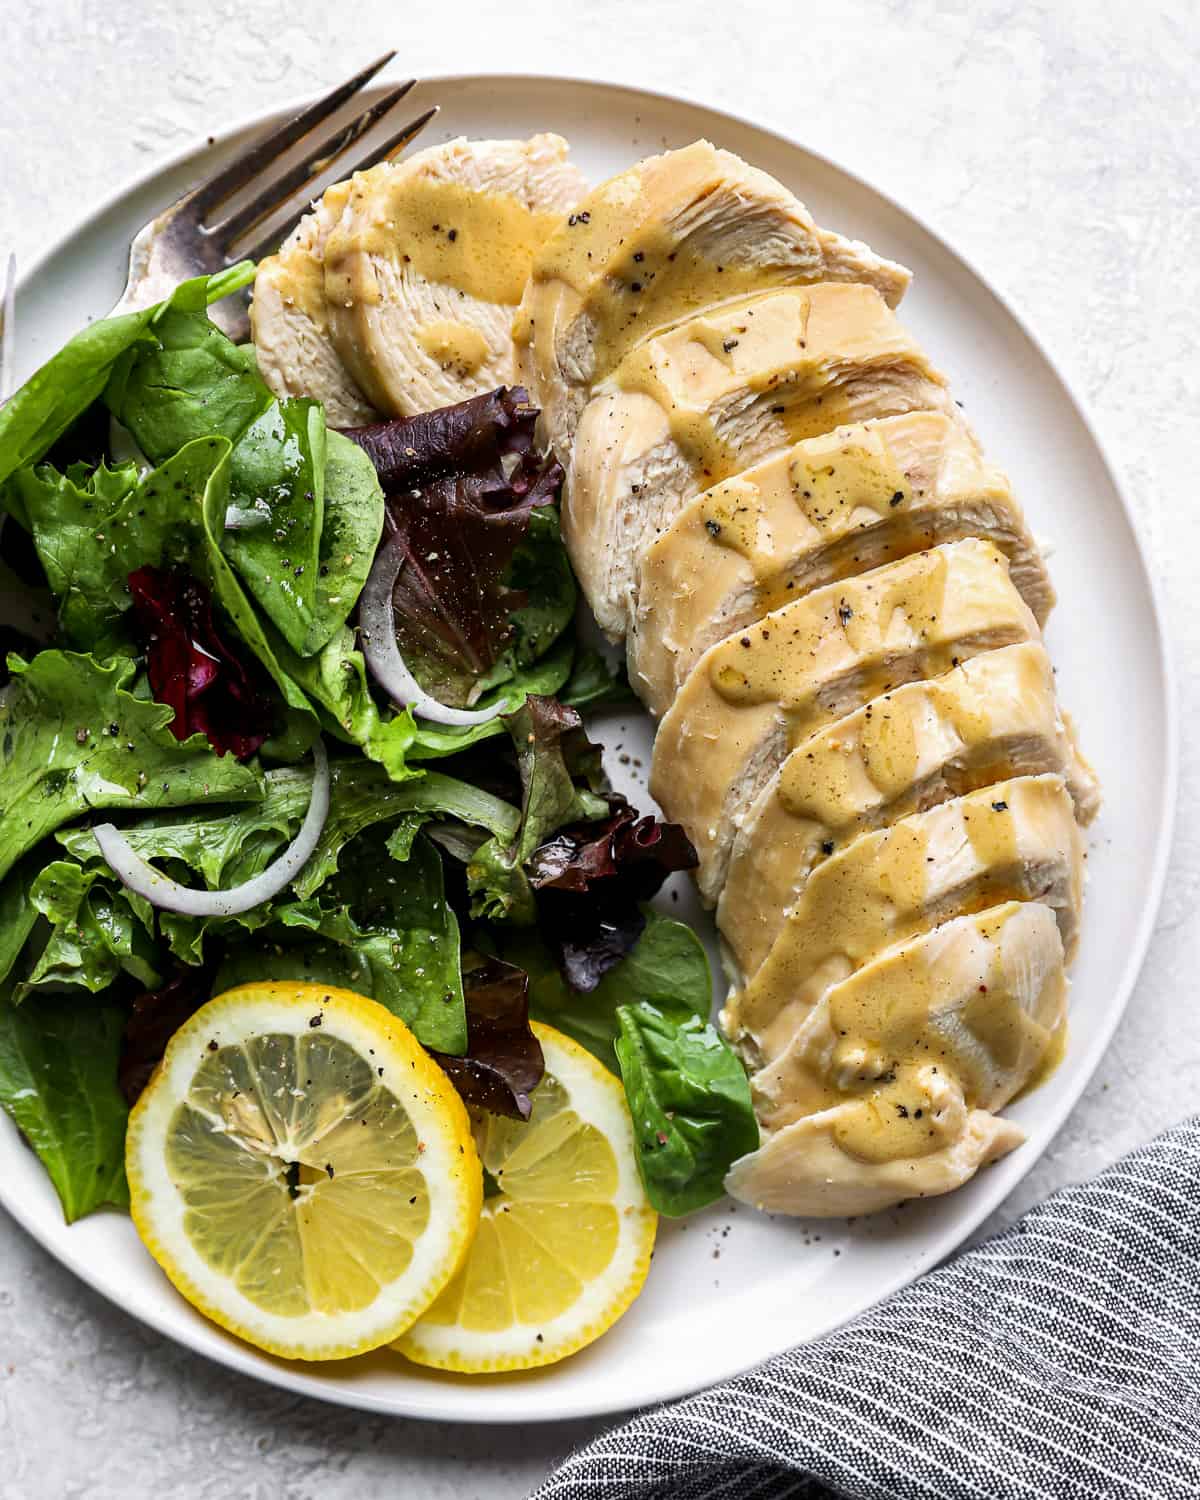 overhead view of a sliced poached chicken breast on a white plate with greens, lemon slices, and a fork.